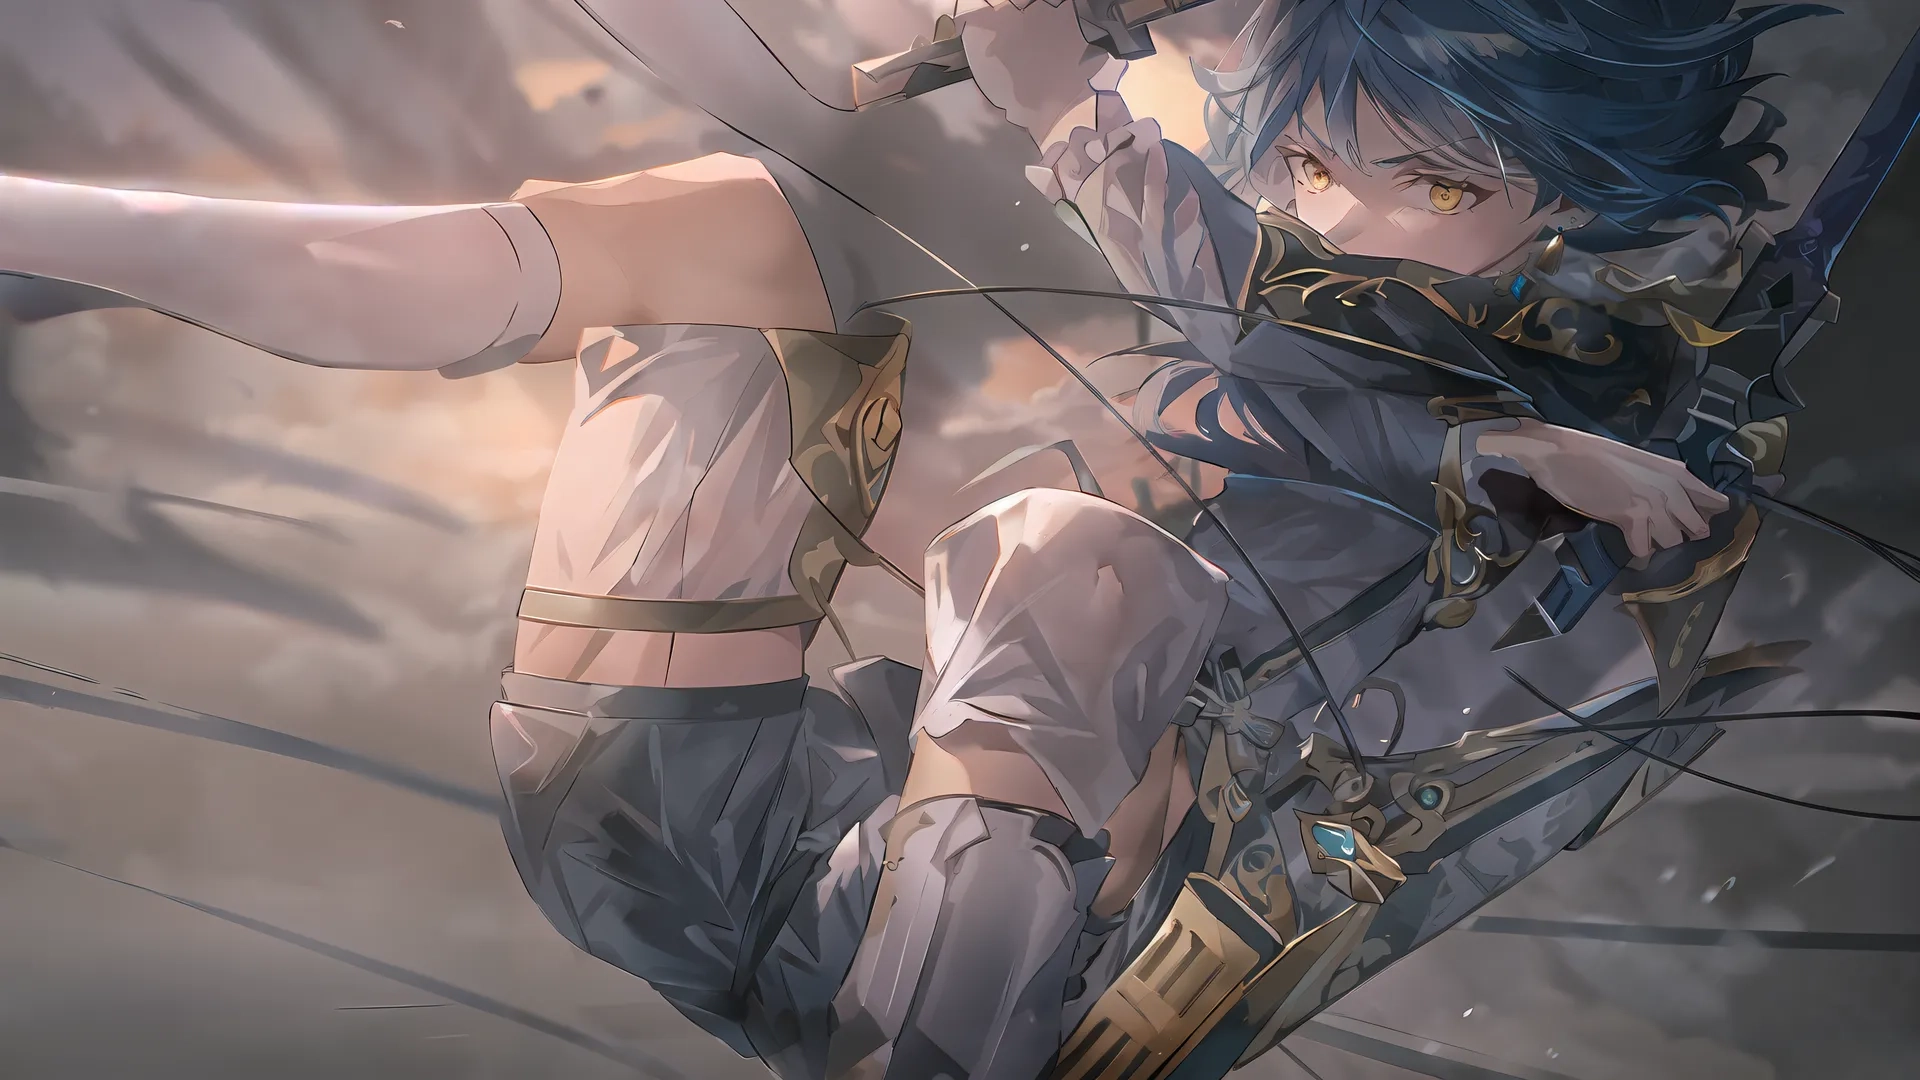 a young adult girl swinging on the end of her sword wielding sword while in a scene from fire emblem, with an ominous looking sky in the background
